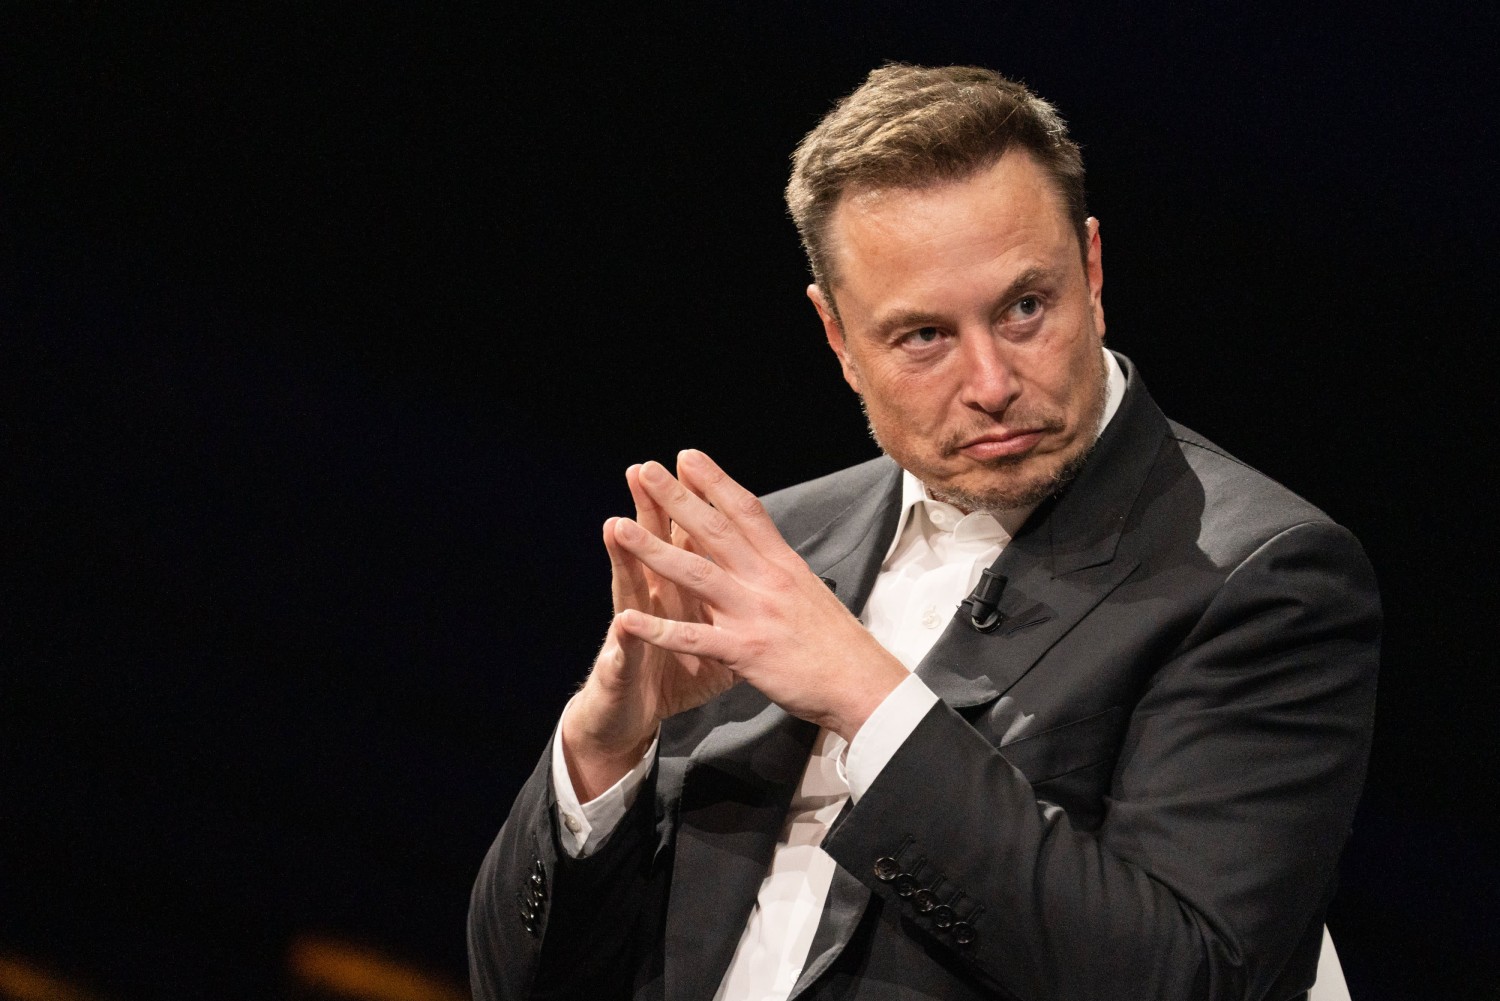 Elon Musk, chief executive officer of Tesla, at the Viva Tech fair in Paris, France, on Friday, June 16, 2023. Nathan Laine | Bloomberg | Getty Images